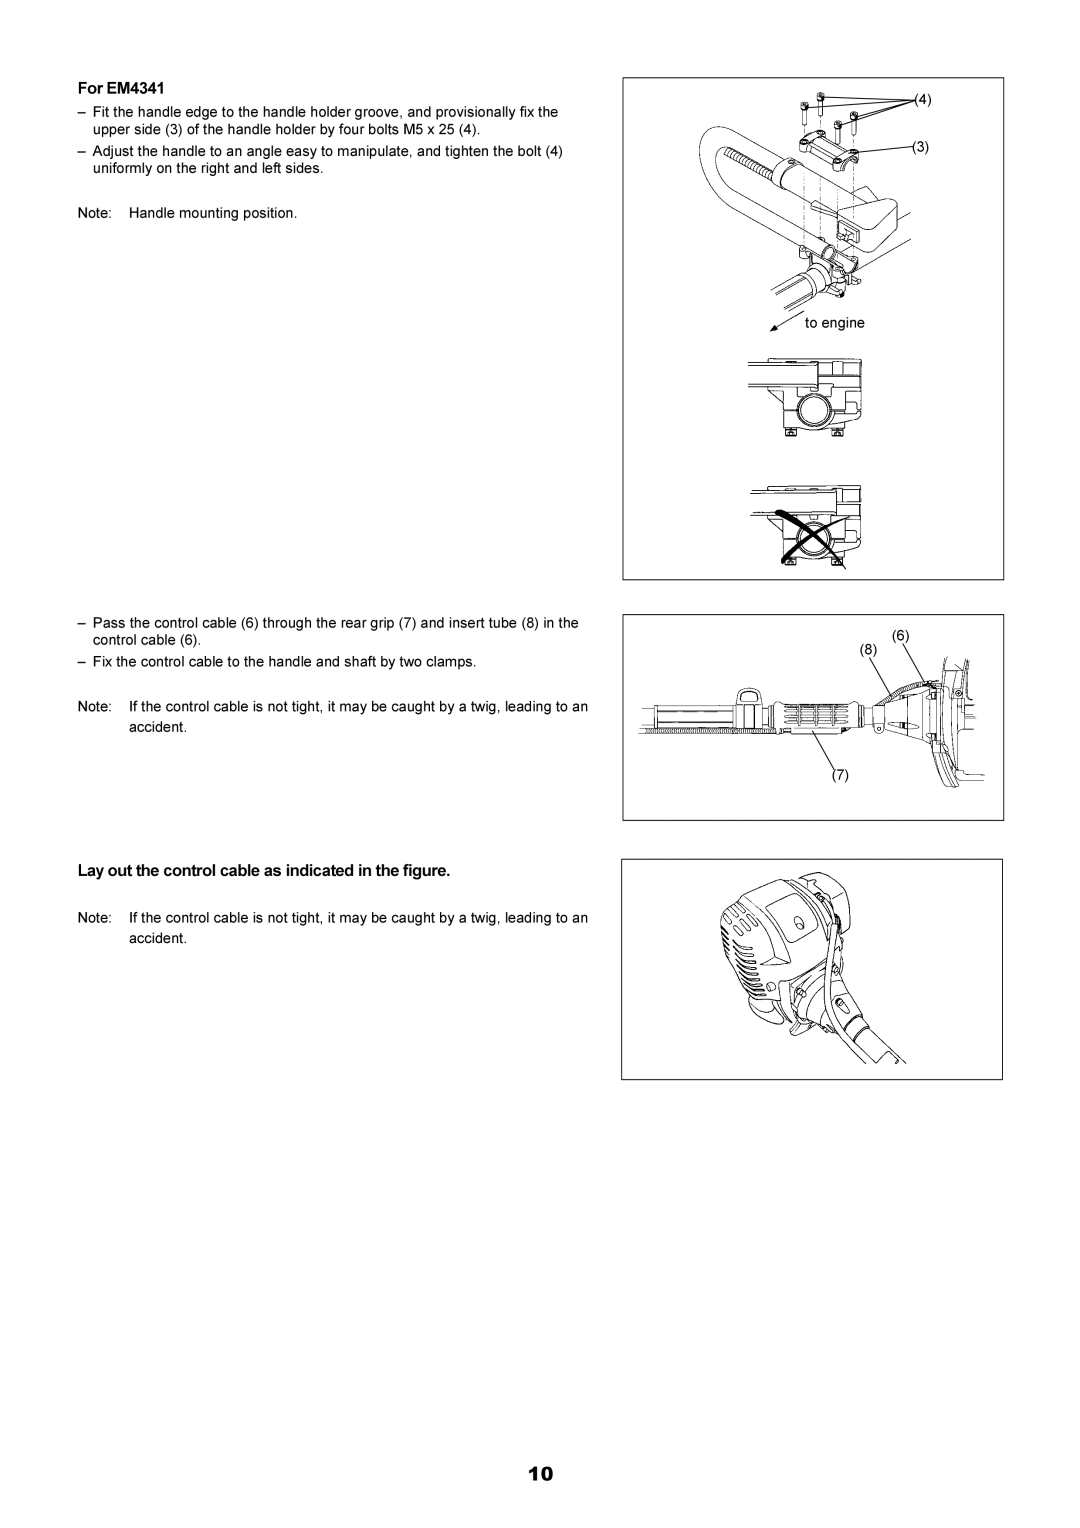 Makita EM4340L instruction manual For EM4341, Lay out the control cable as indicated in the figure 